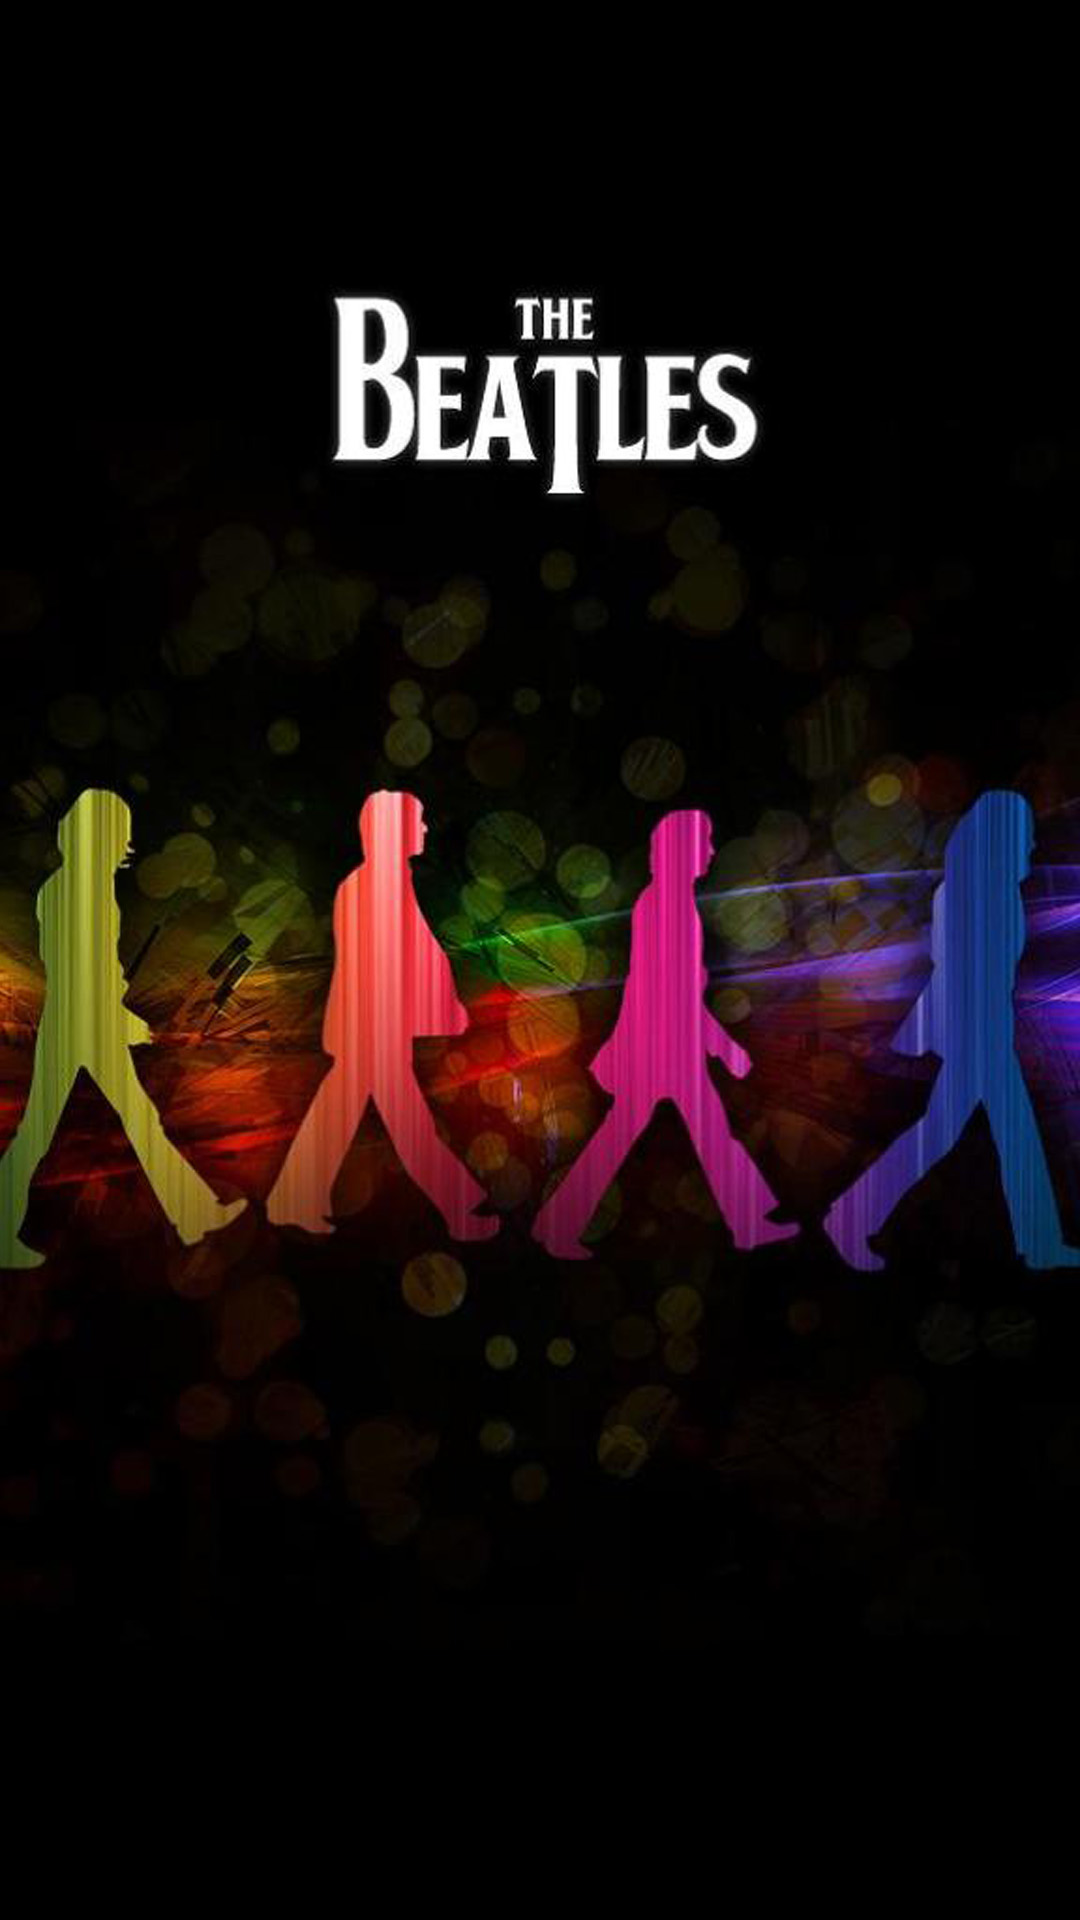 The Beatles - iPhone wallpapers | iPhone Wallpapers